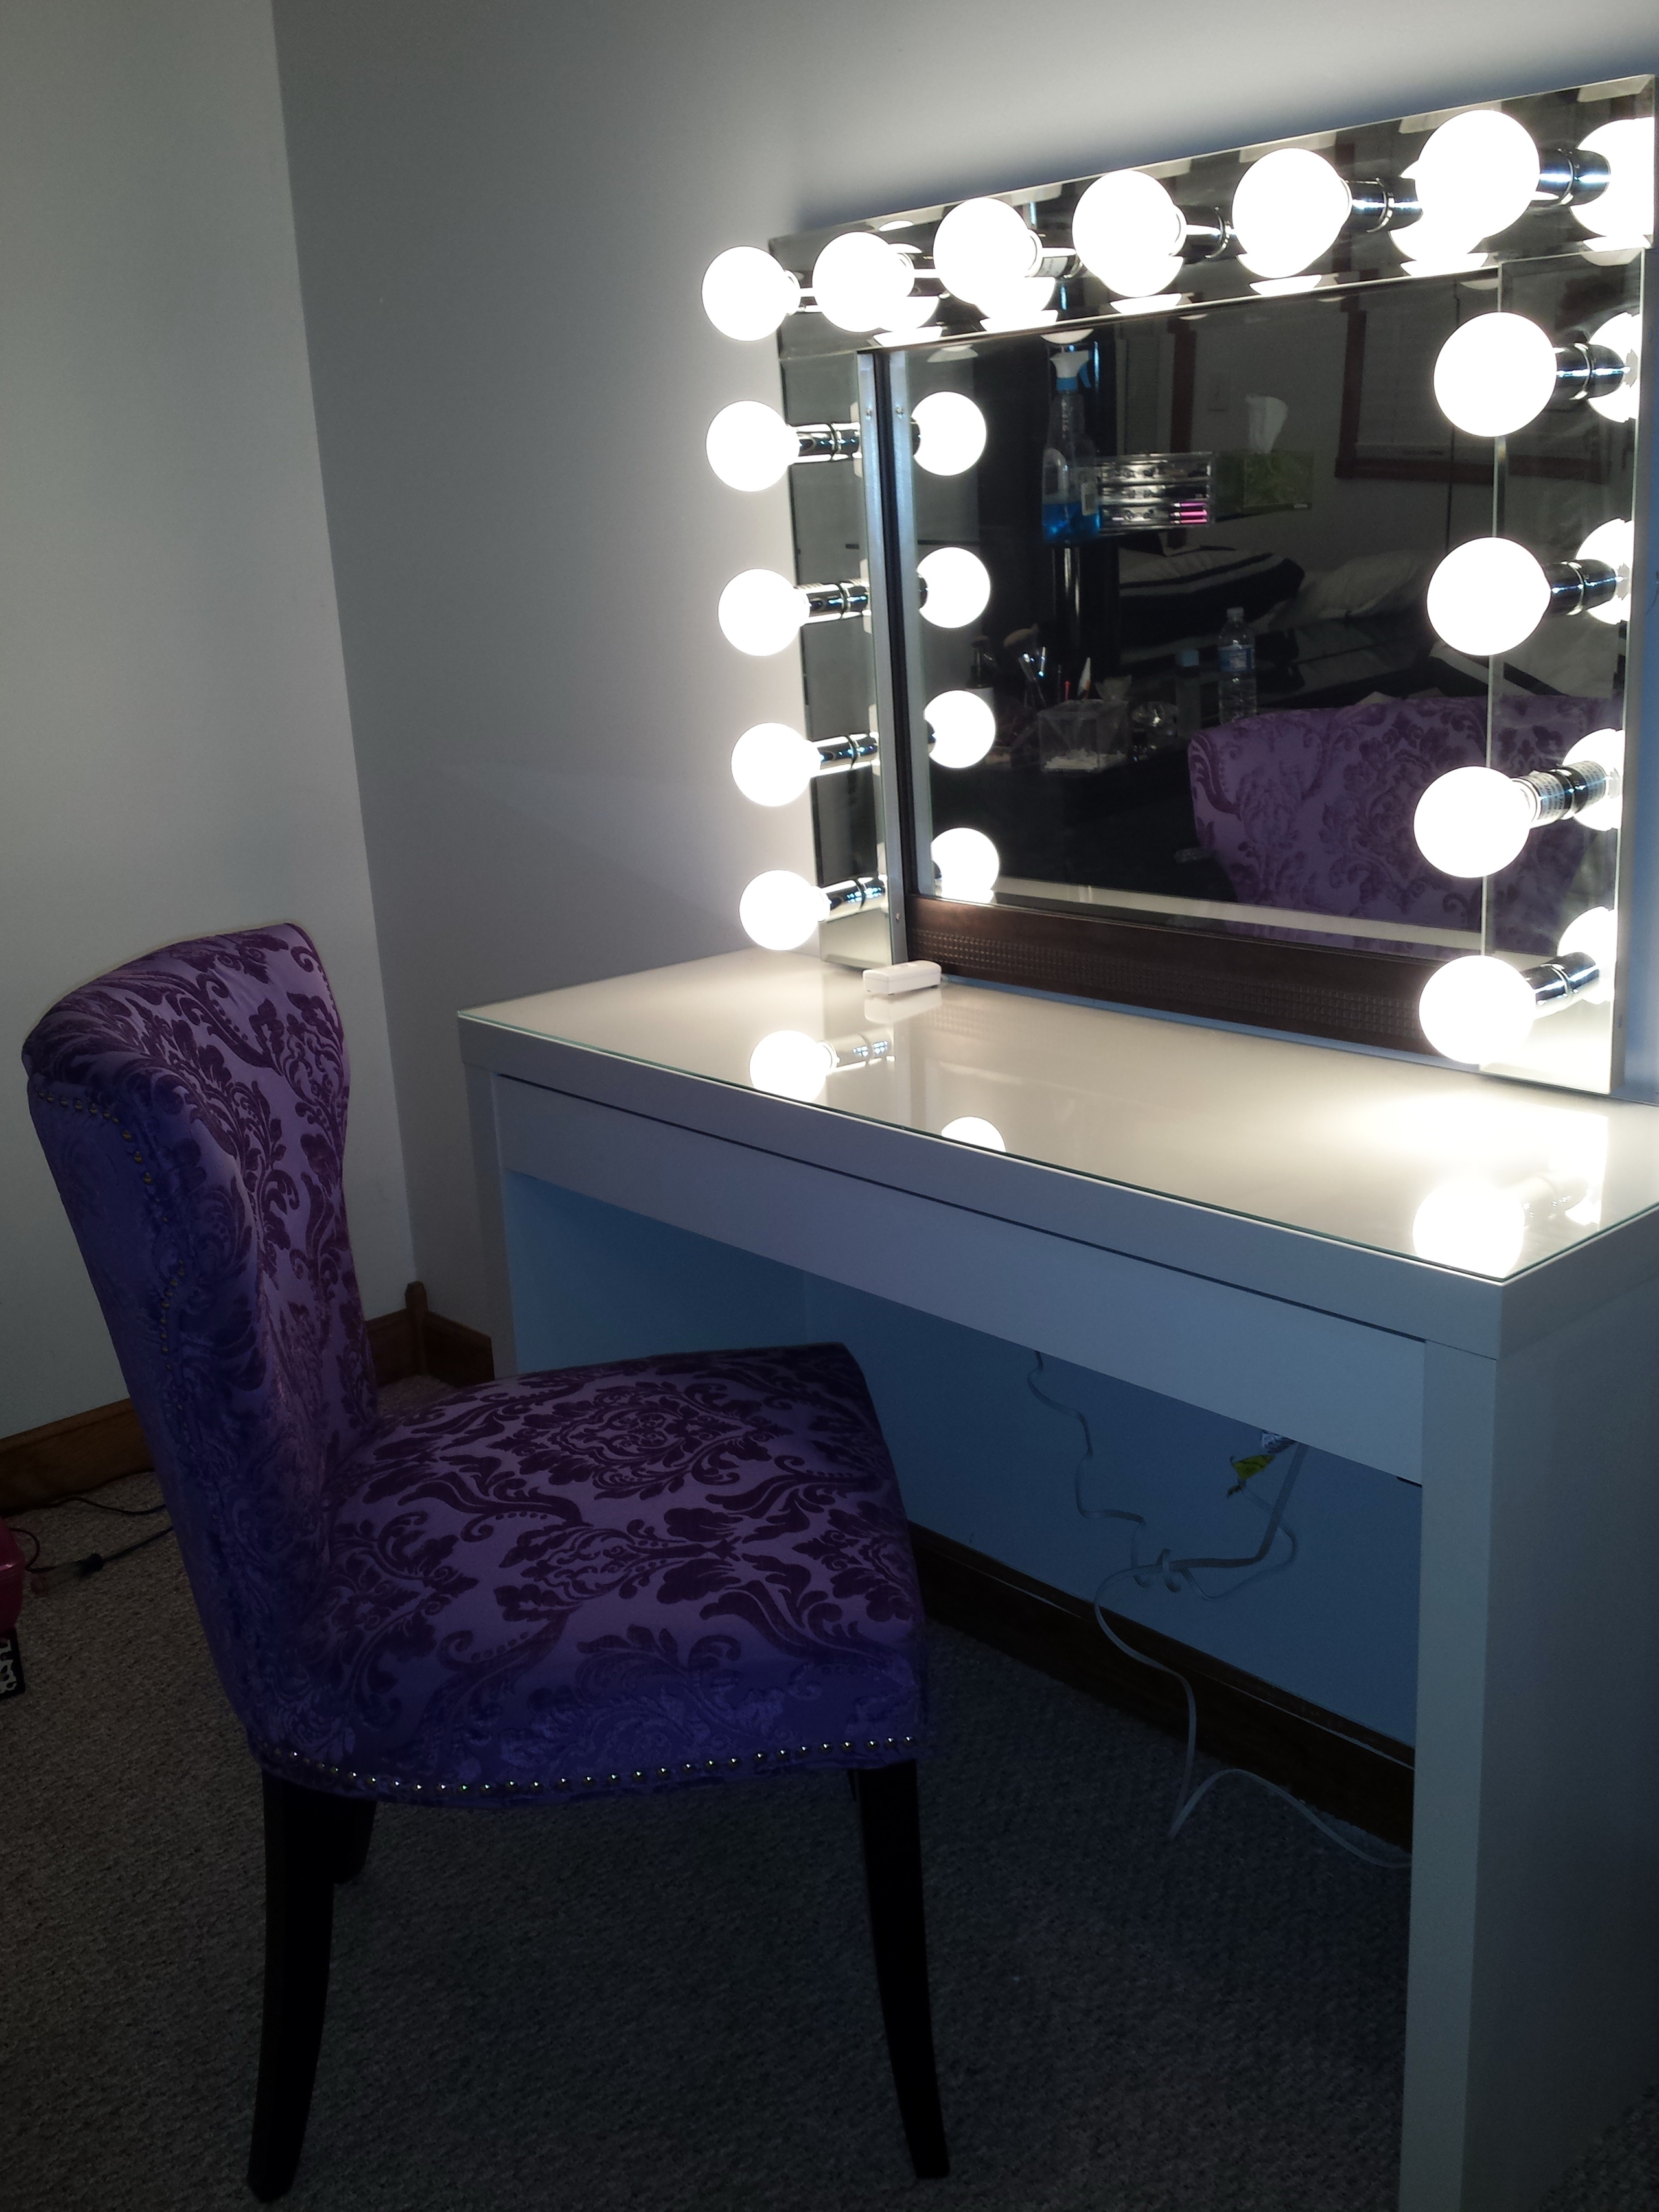 Makeup Vanity Table With Lighted Mirror, Lighted Make Up Vanity